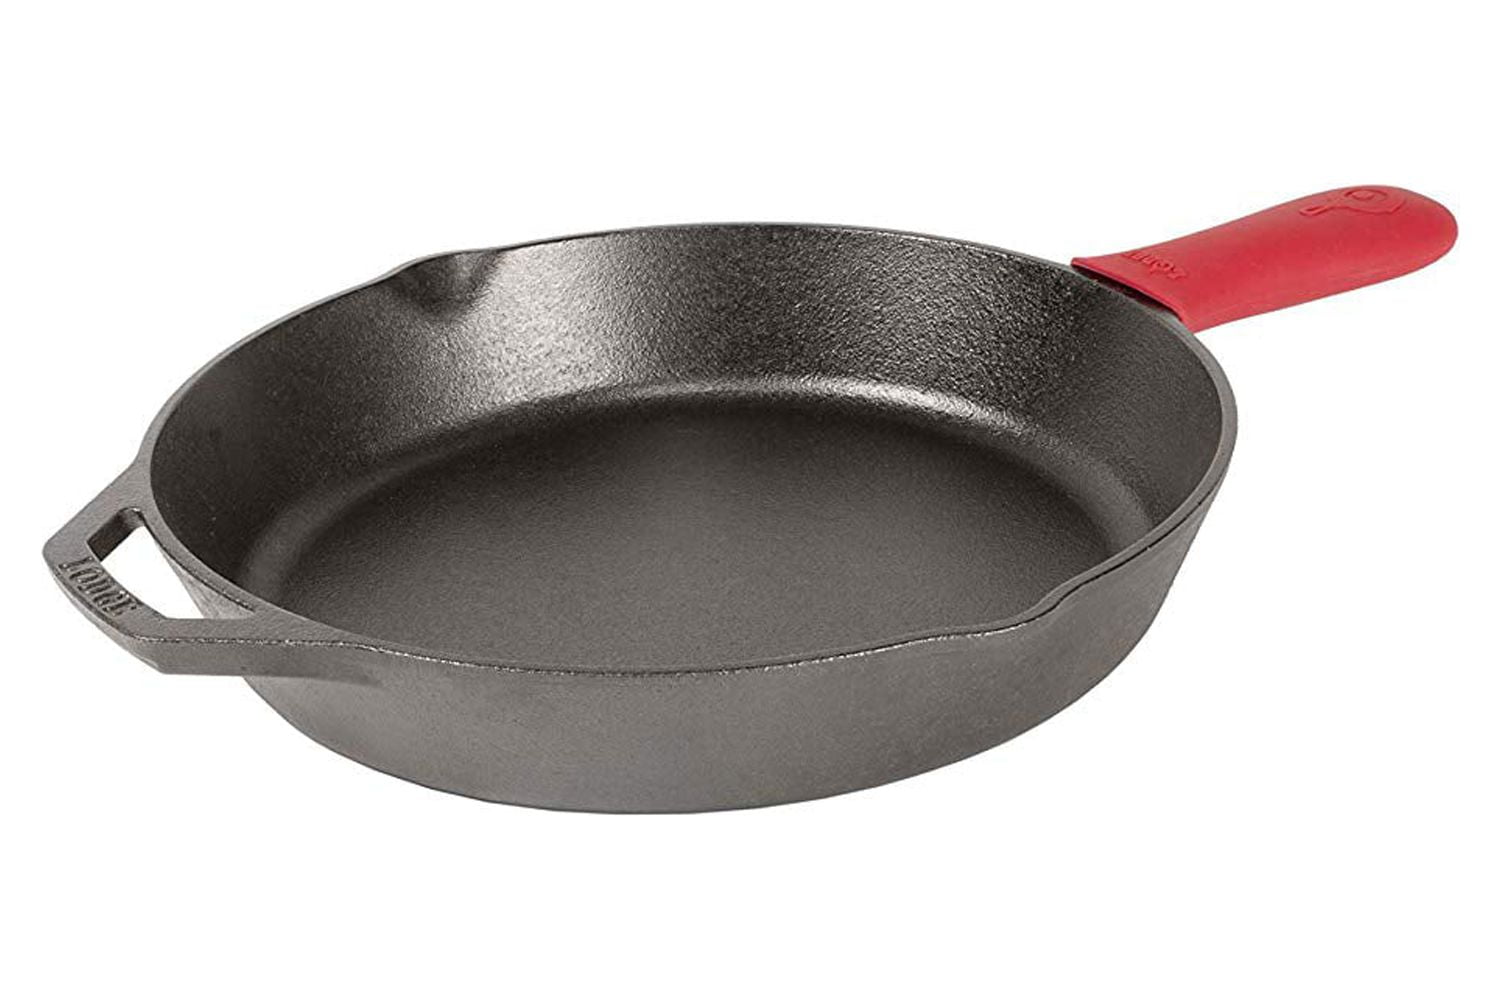 Legend Cast Iron Skillet with Lid | Large 12” Frying Pan with Glass Lid &  Silicone Handle for Oven, Induction, Cooking, Pizza, Sauteing, Grilling 